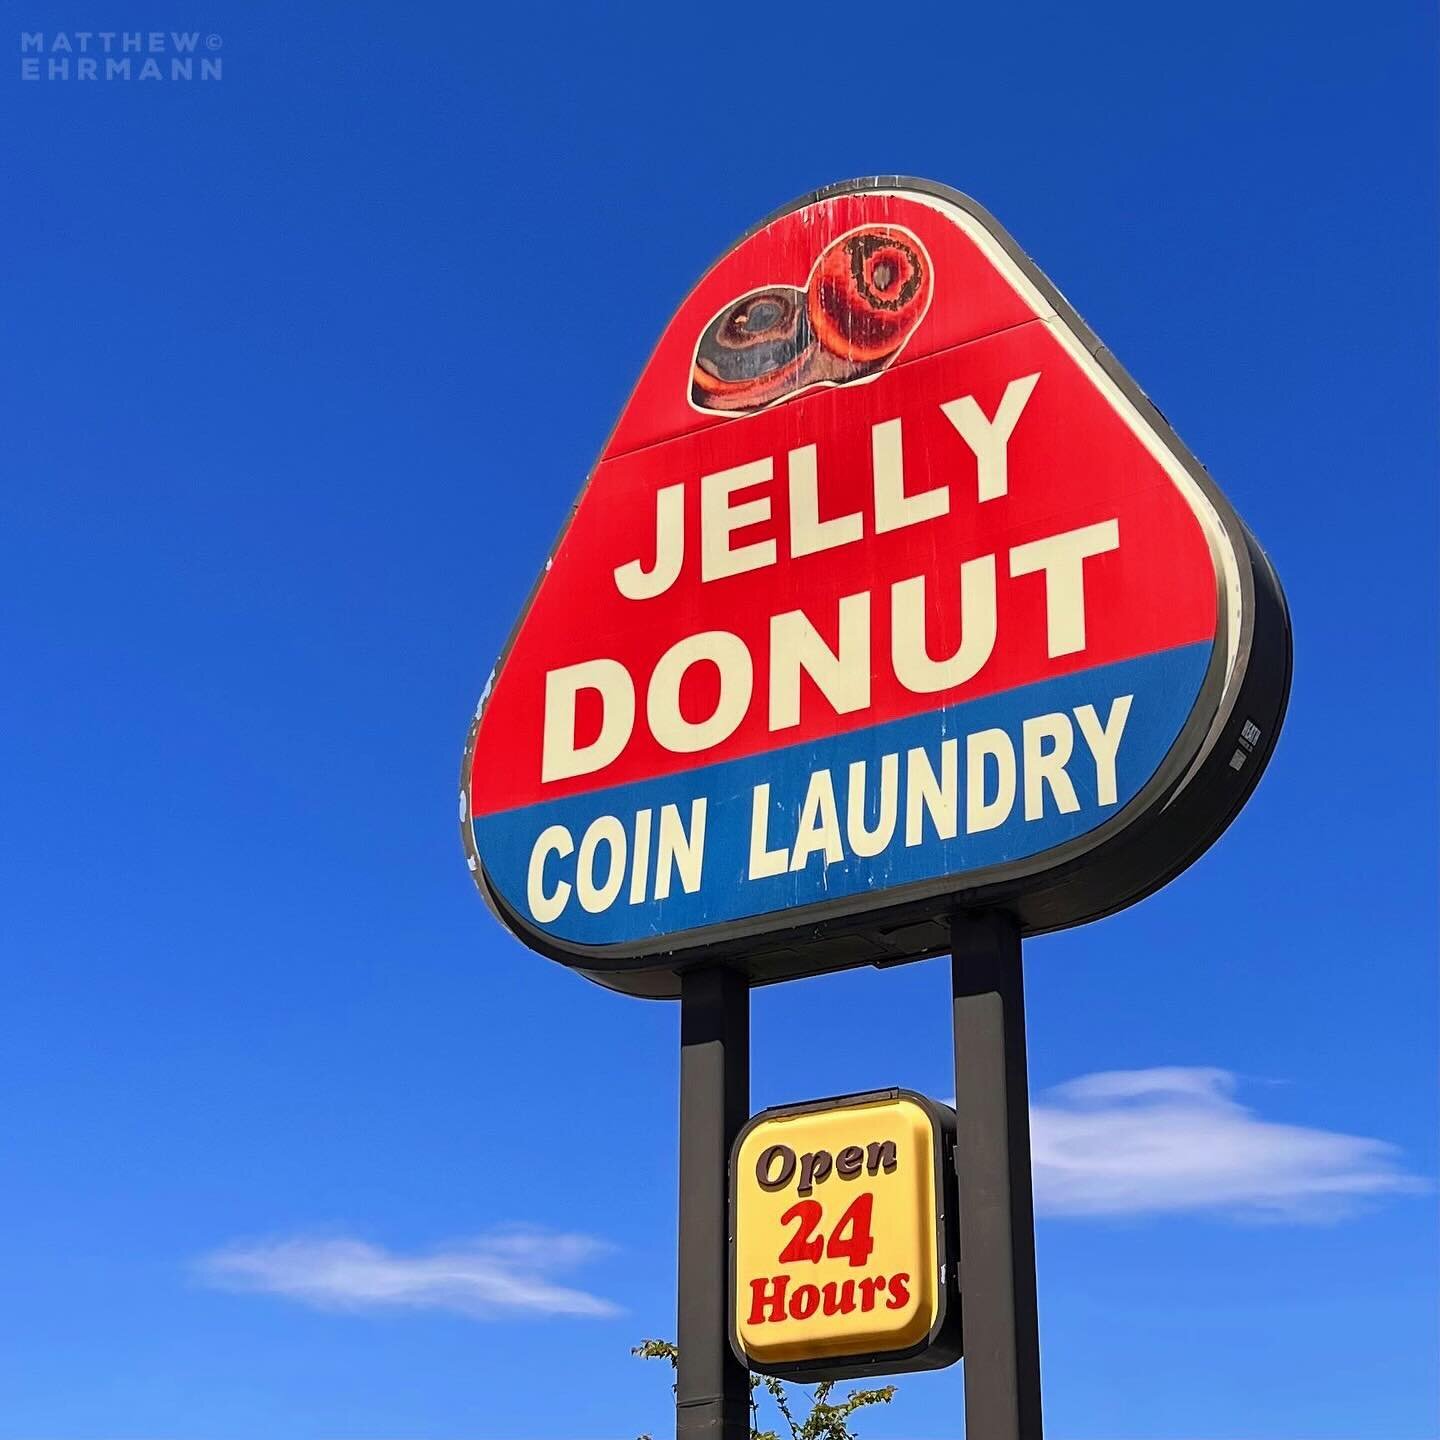 I&rsquo;m still not sure whether this is donuts or laundry? What&rsquo;s clear is that this used to be a Winchells, and they kept the original &ldquo;Open 24 Hours&rdquo; sign.
.
#photosfromtheroad
.
#signsunited #signgeeks #midcentury #abmlifeiscolo